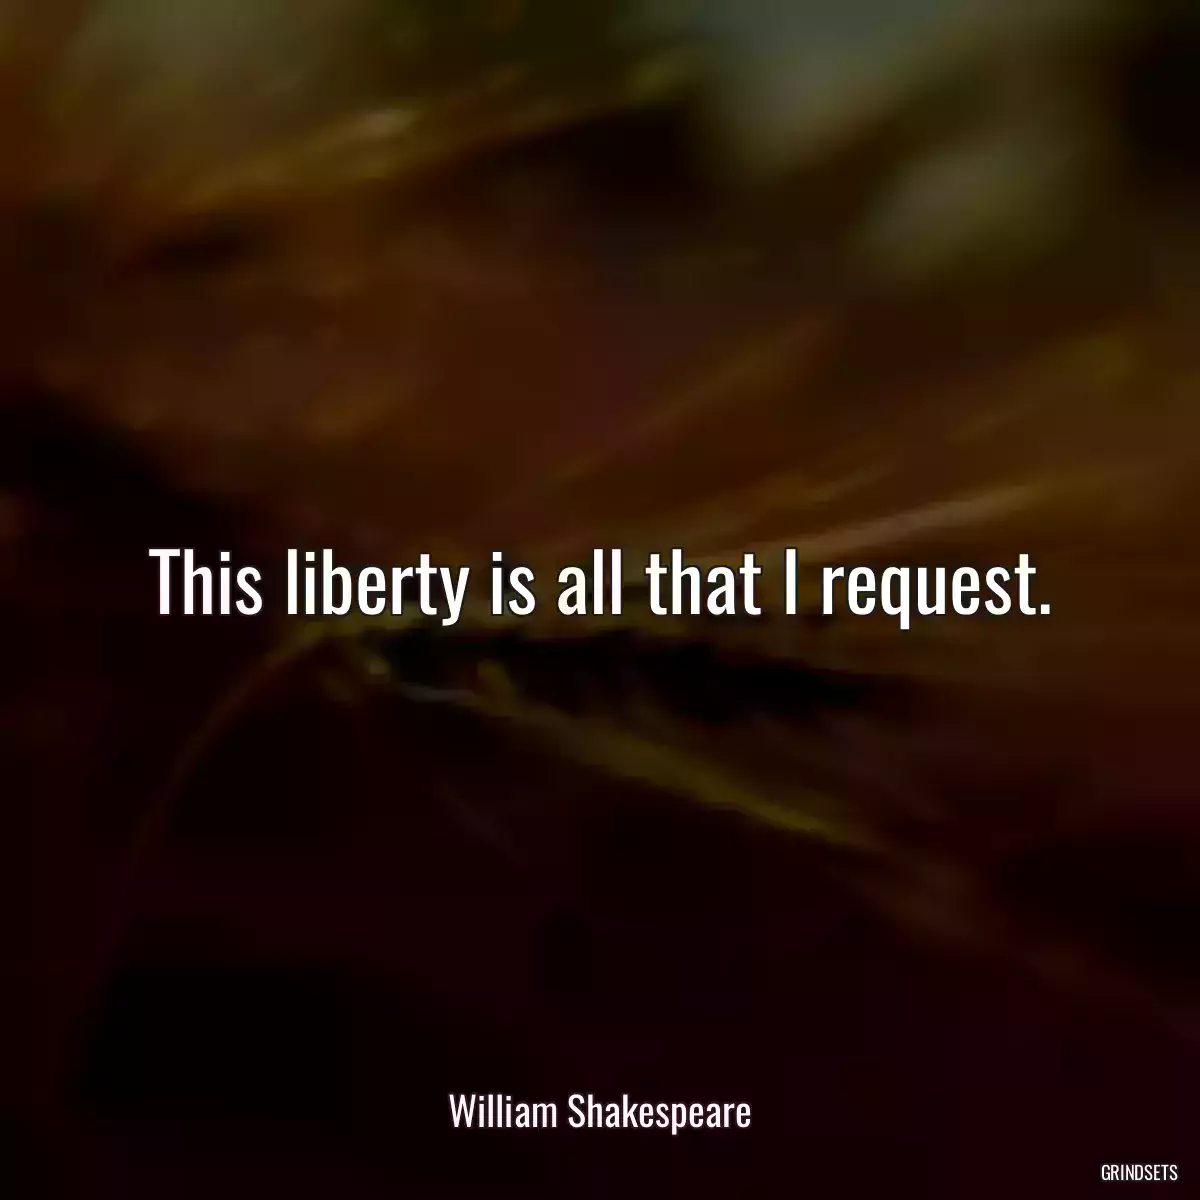 This liberty is all that I request.